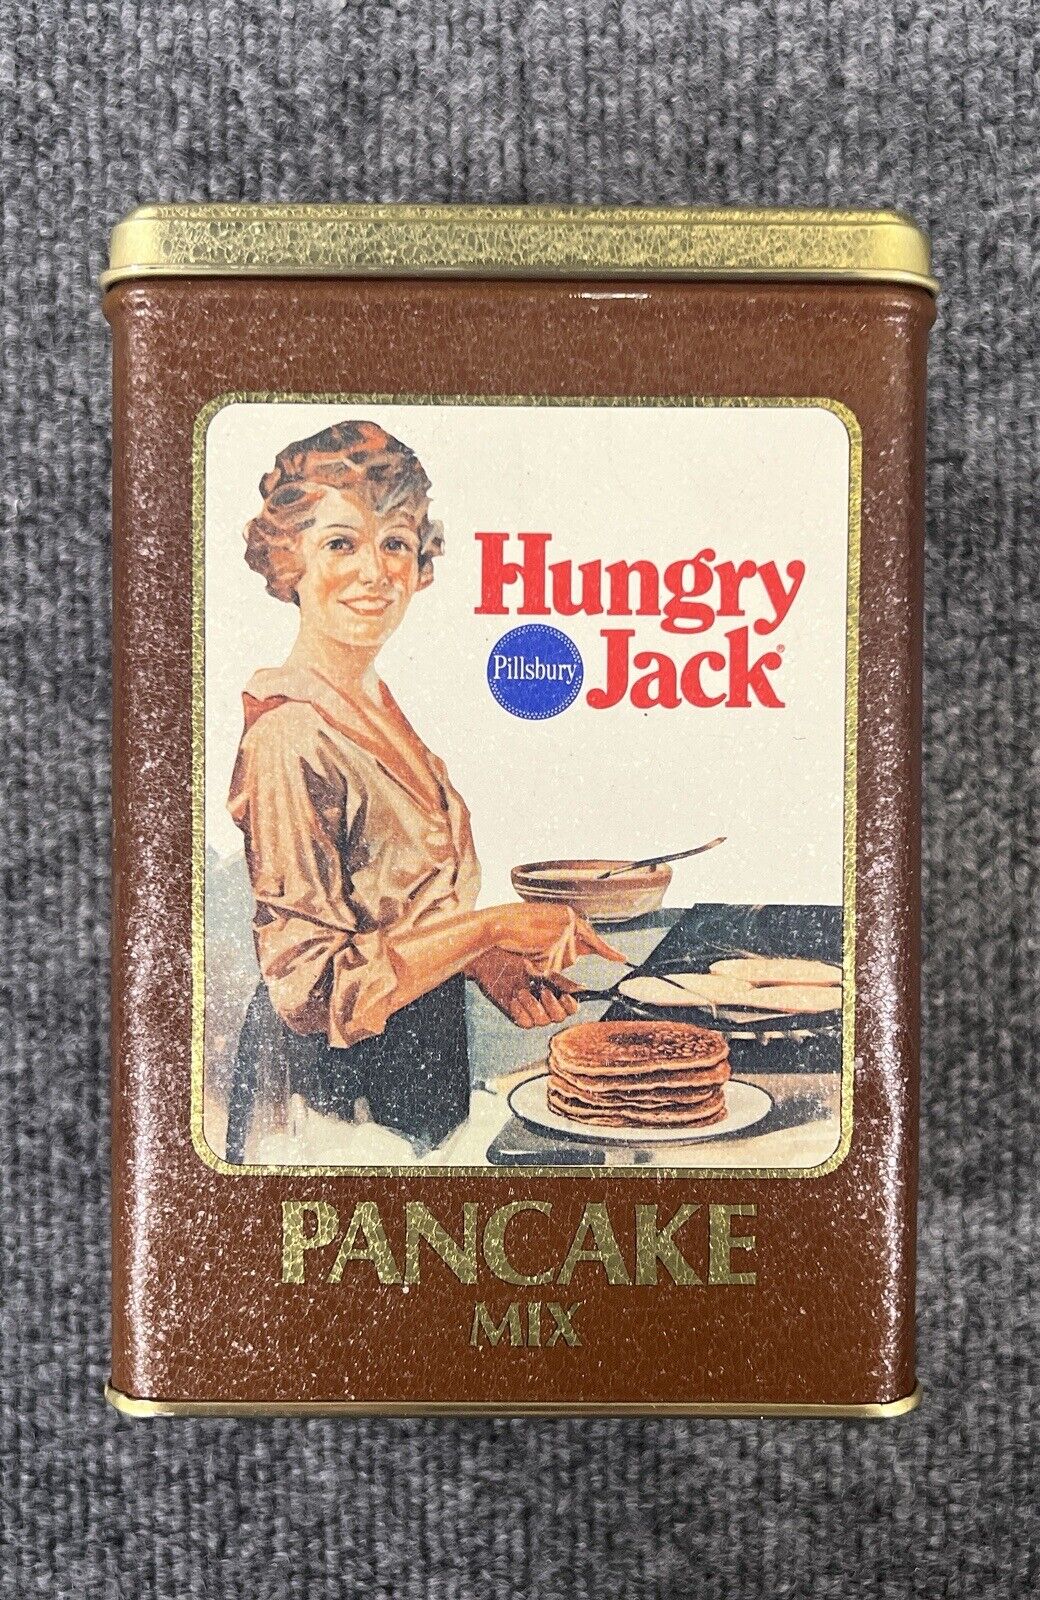 Vintage Pillsbury Hungry Jack Buttermilk Complete Pancake Mix 32 oz Tin Canister